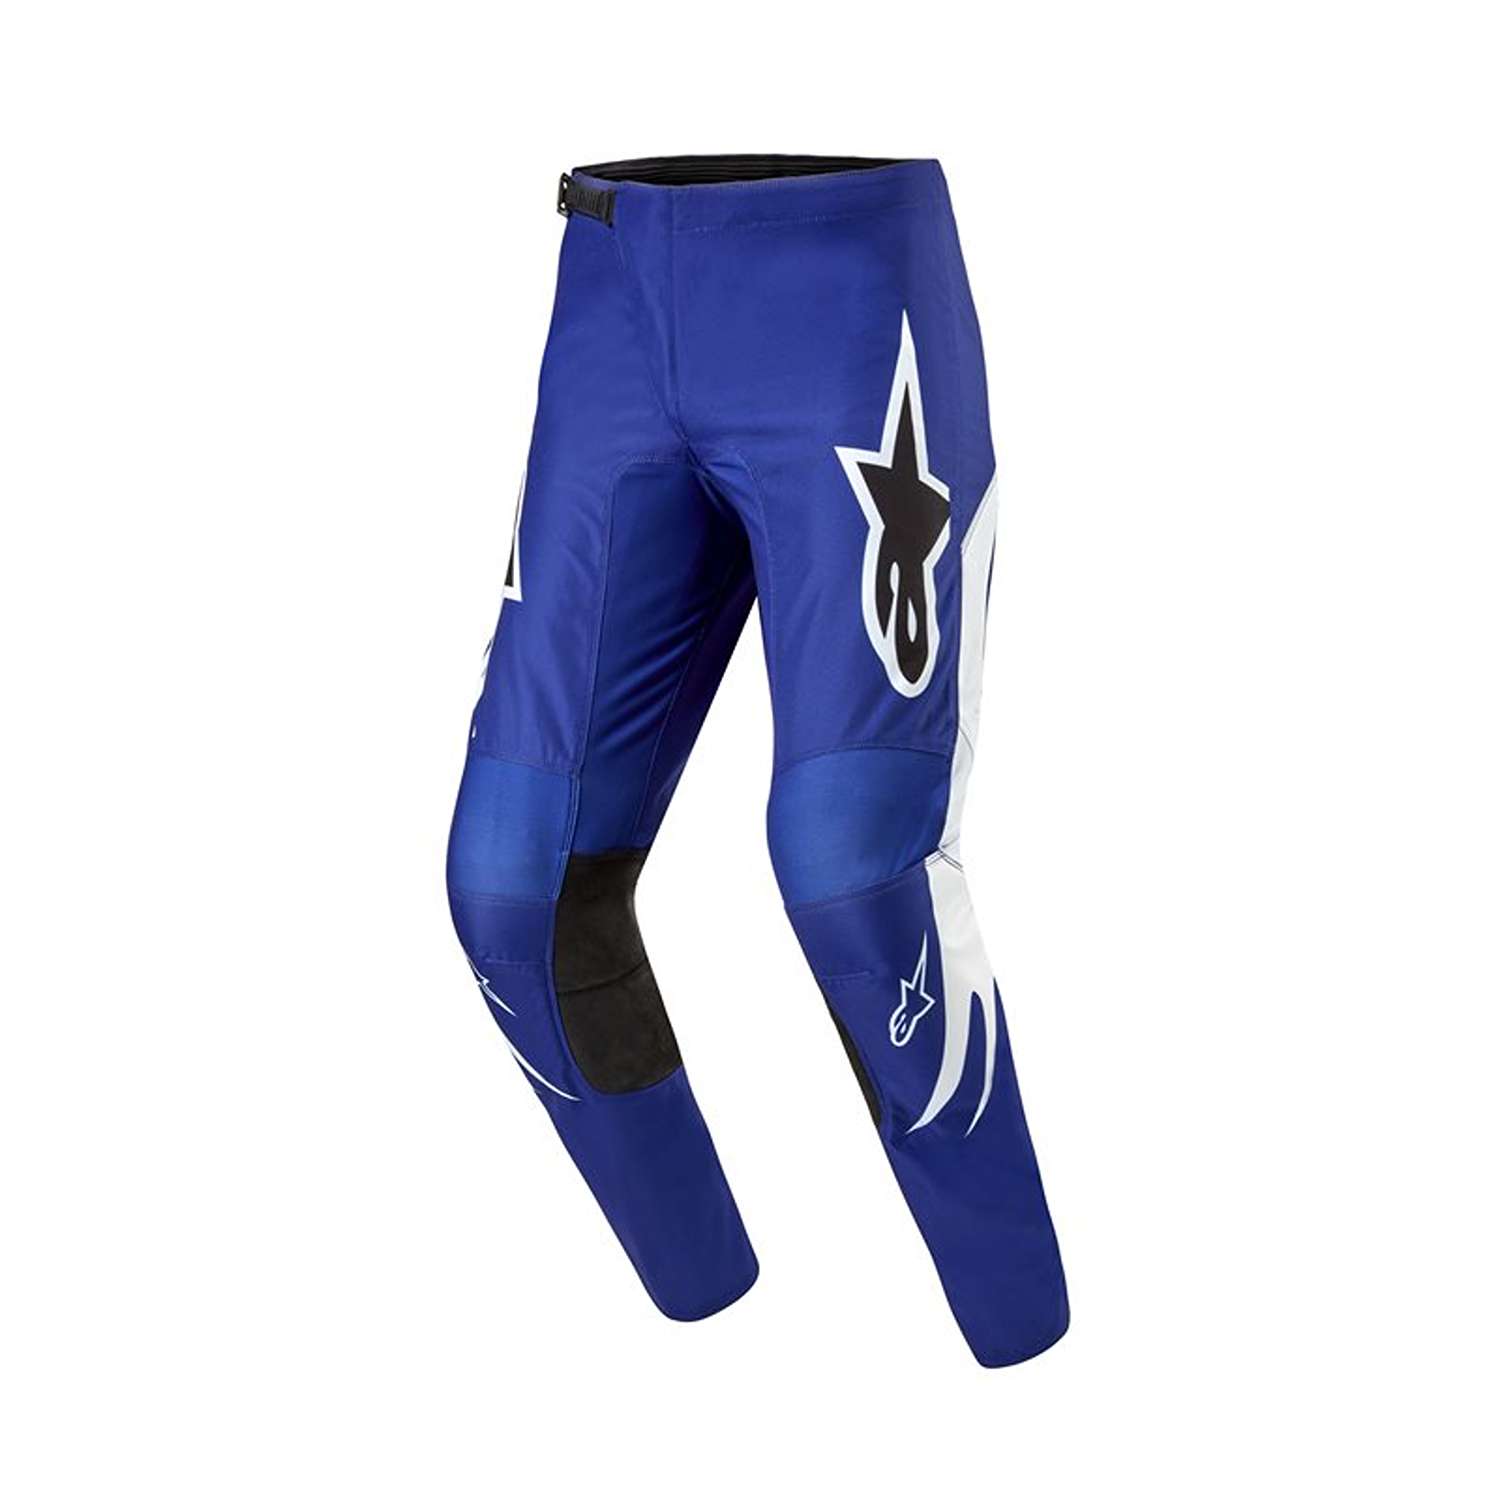 Image of Alpinestars Fluid Lucent Pants Blue Ray White Size 32 ID 8059347266152